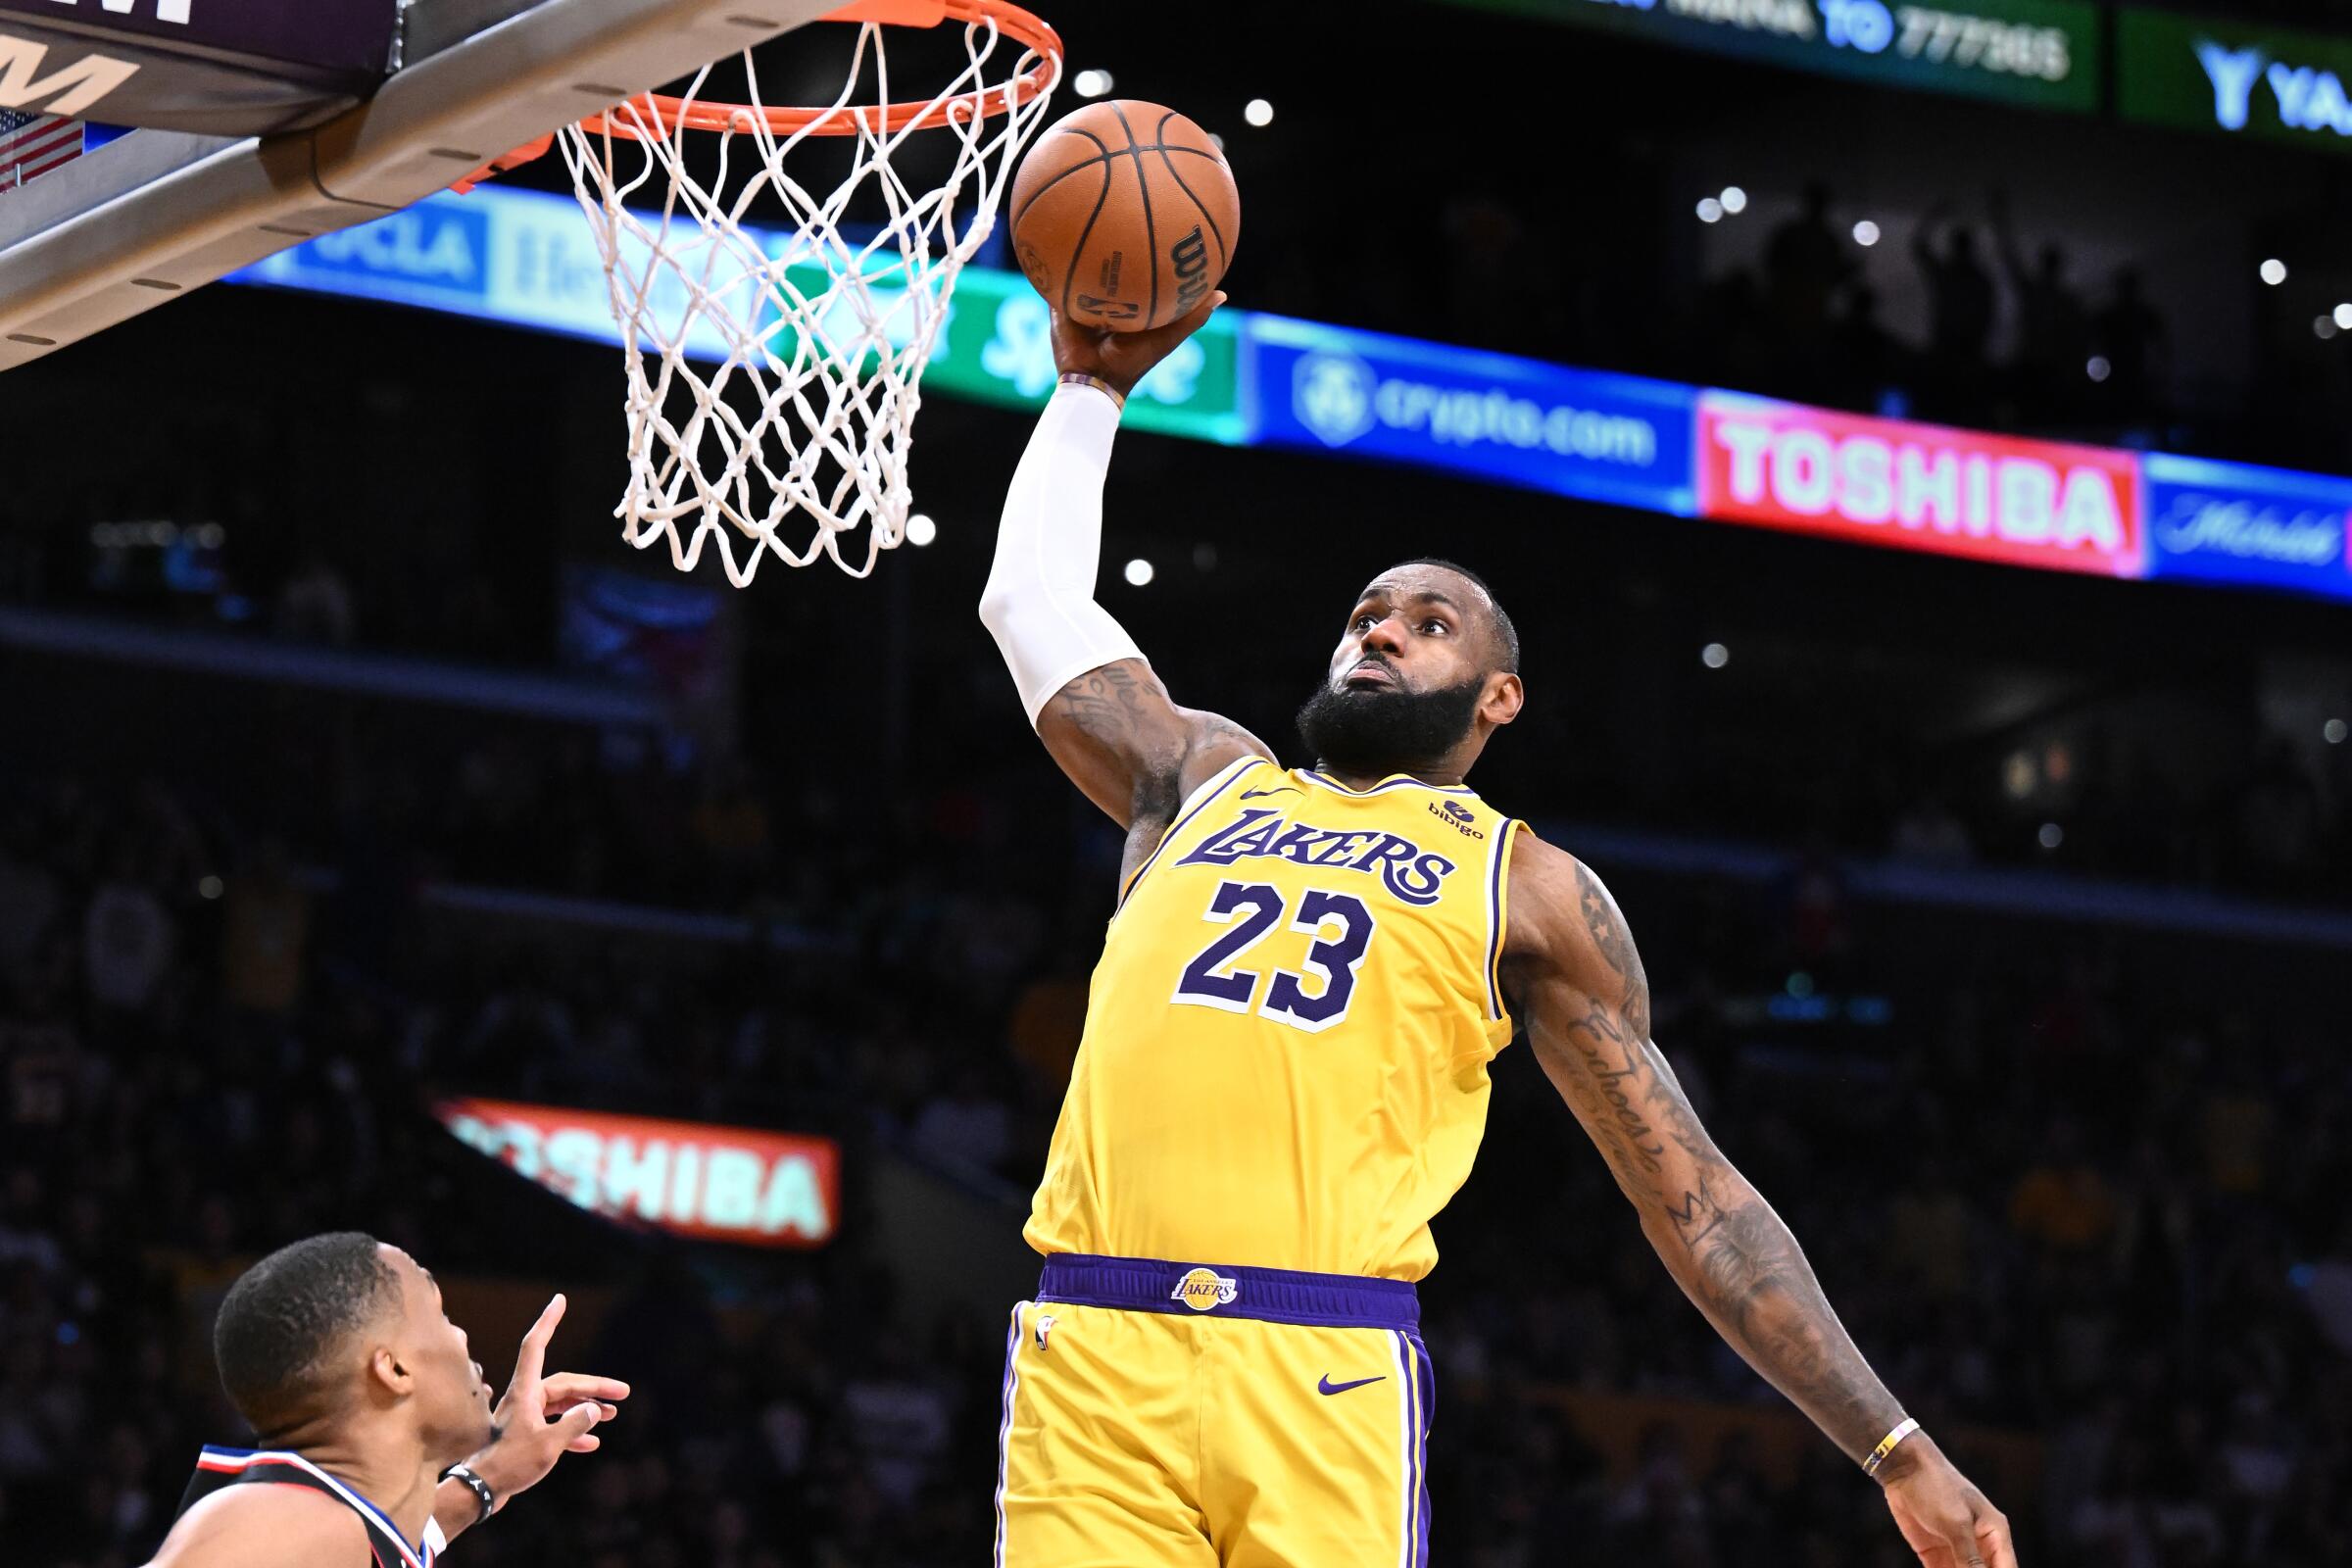 Lakers LeBron James' dunks over Clippers' Russell Westbrook in overtime